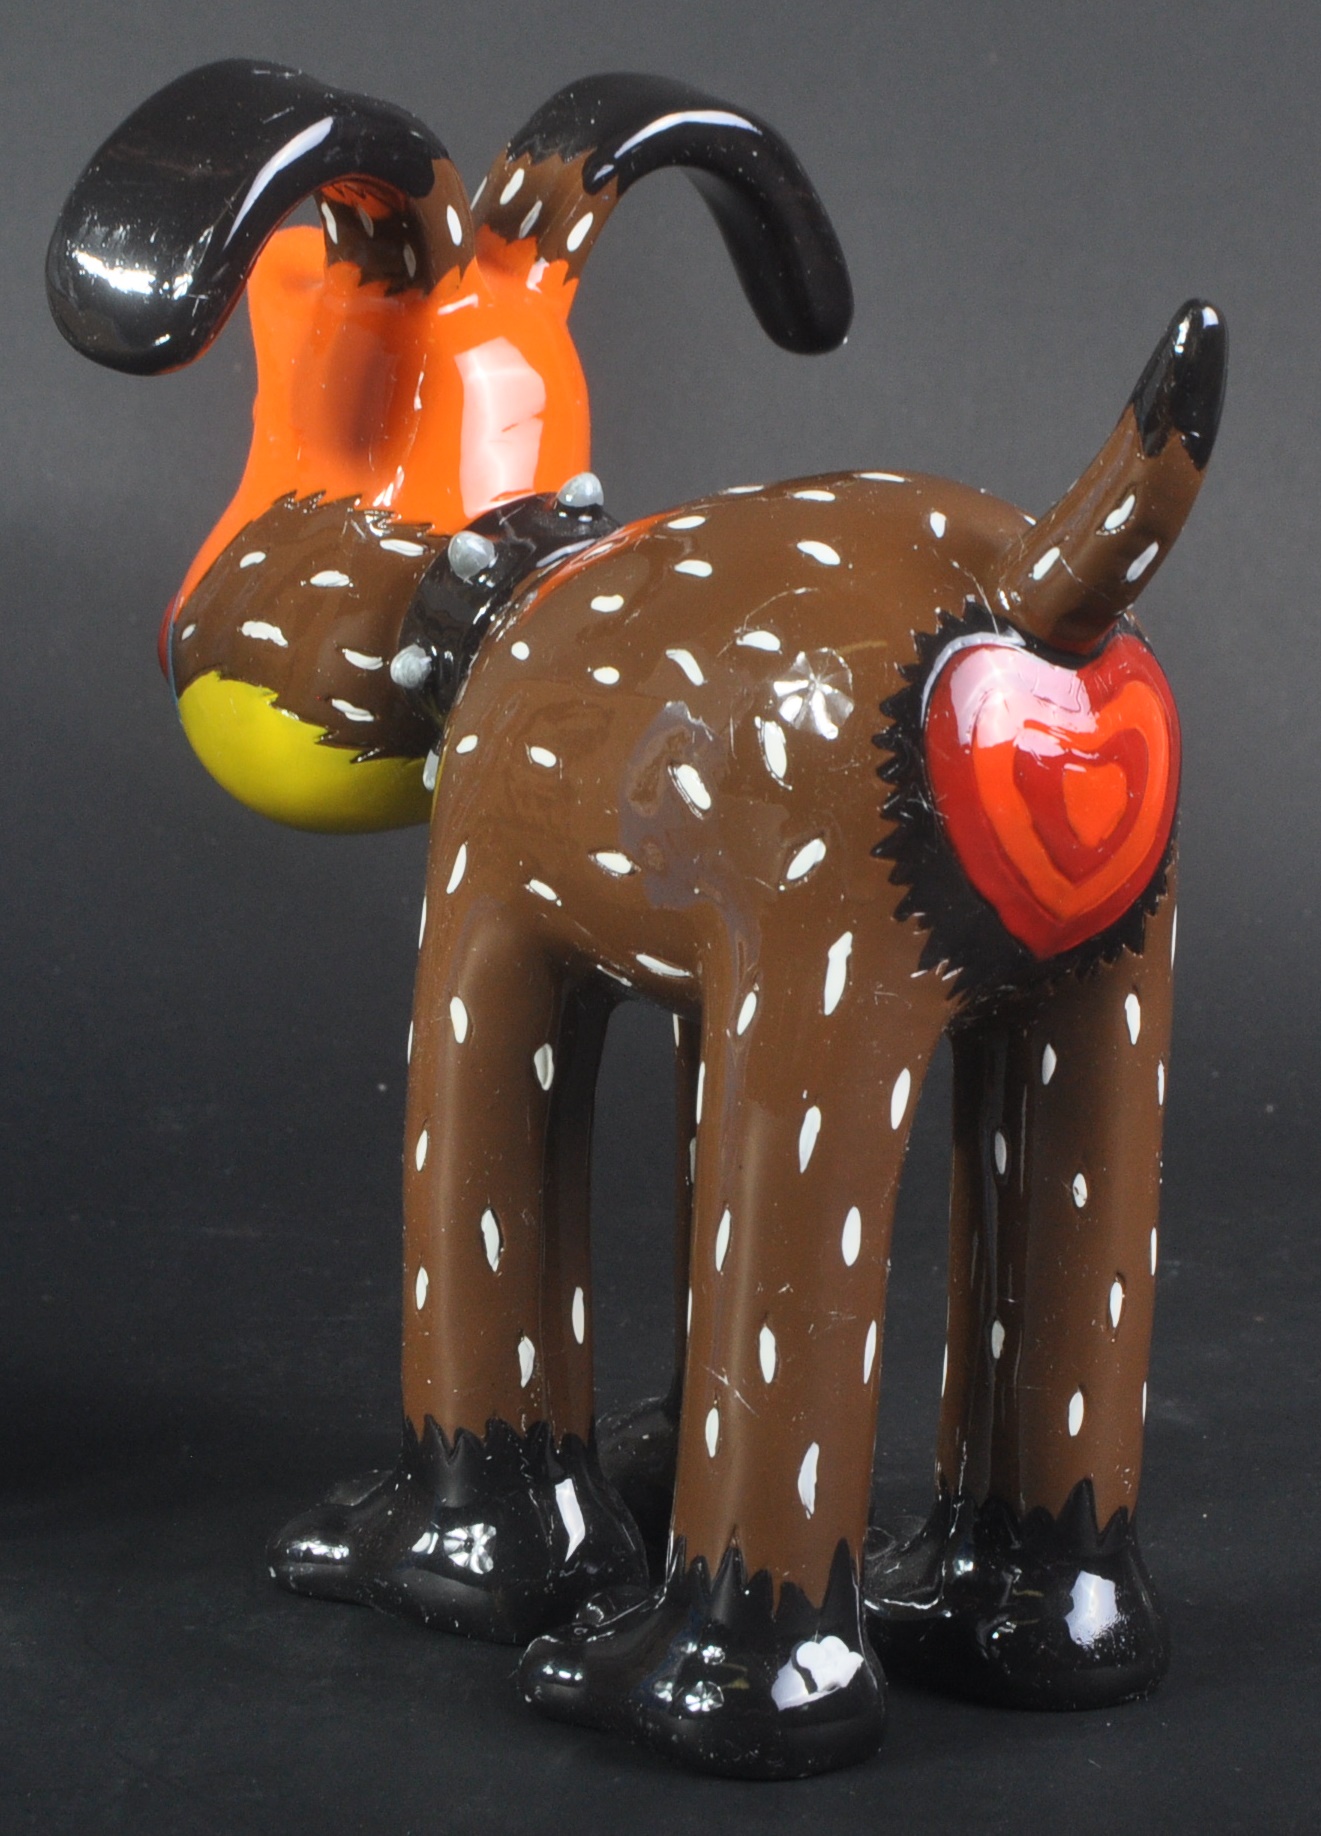 WALLACE & GROMIT - GROMIT UNLEASHED COLLECTABLE FIGURINE - Image 5 of 6